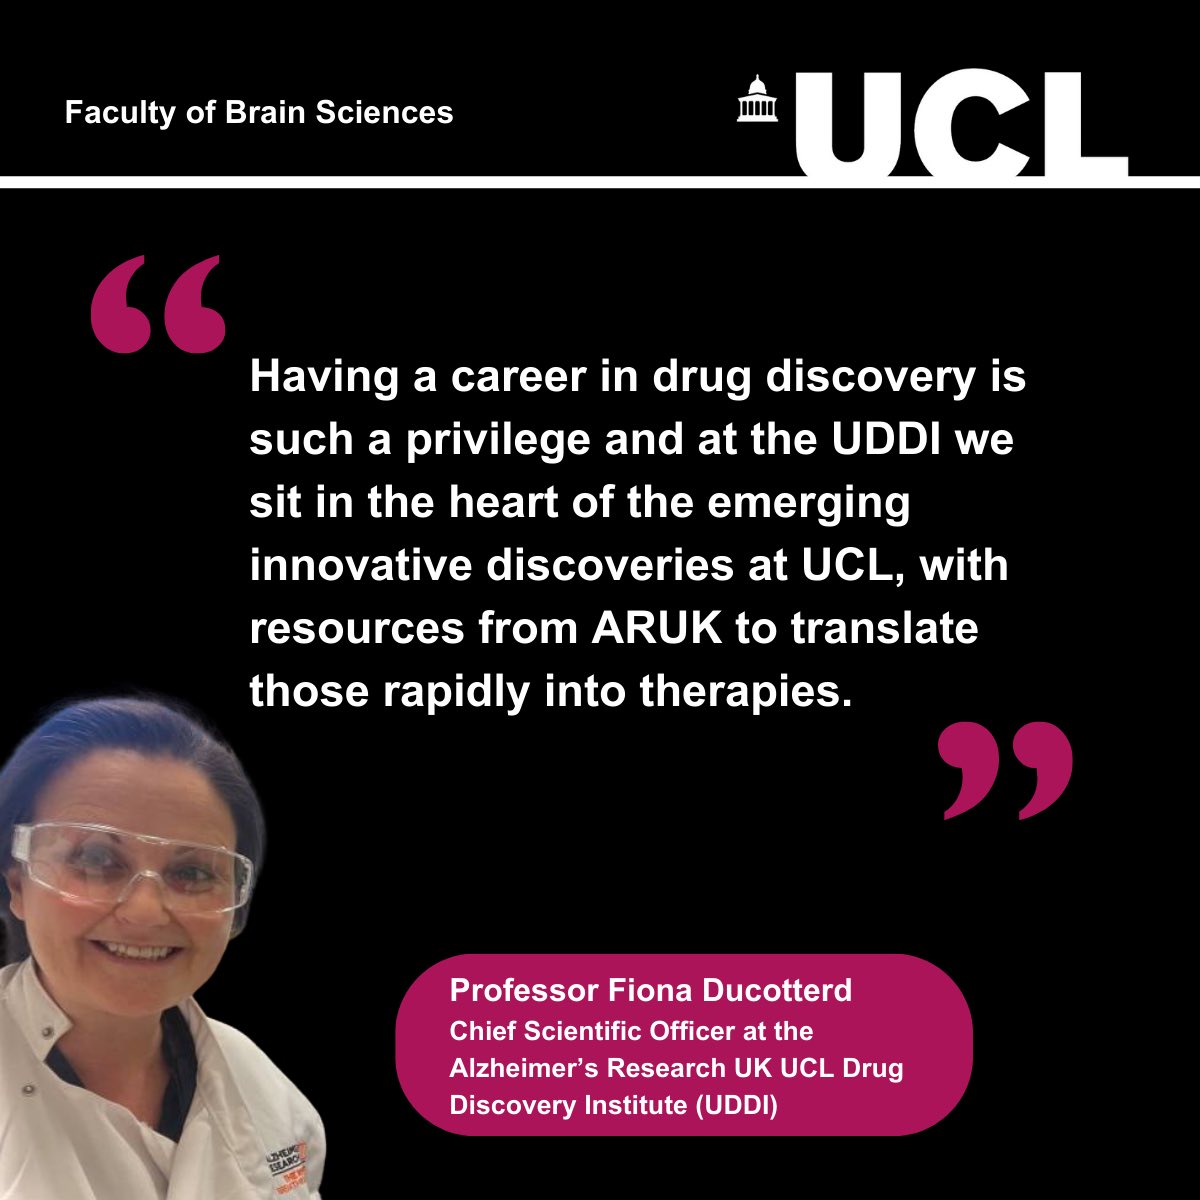 We are working together to make new medicines this #DementiaActionWeek and every week #foracure @ARUK_UCL_DDI @UCLIoN with @AlzResearchUK @ARUKscientist Your stories inspire us 🧡 bit.ly/3WBmYkV